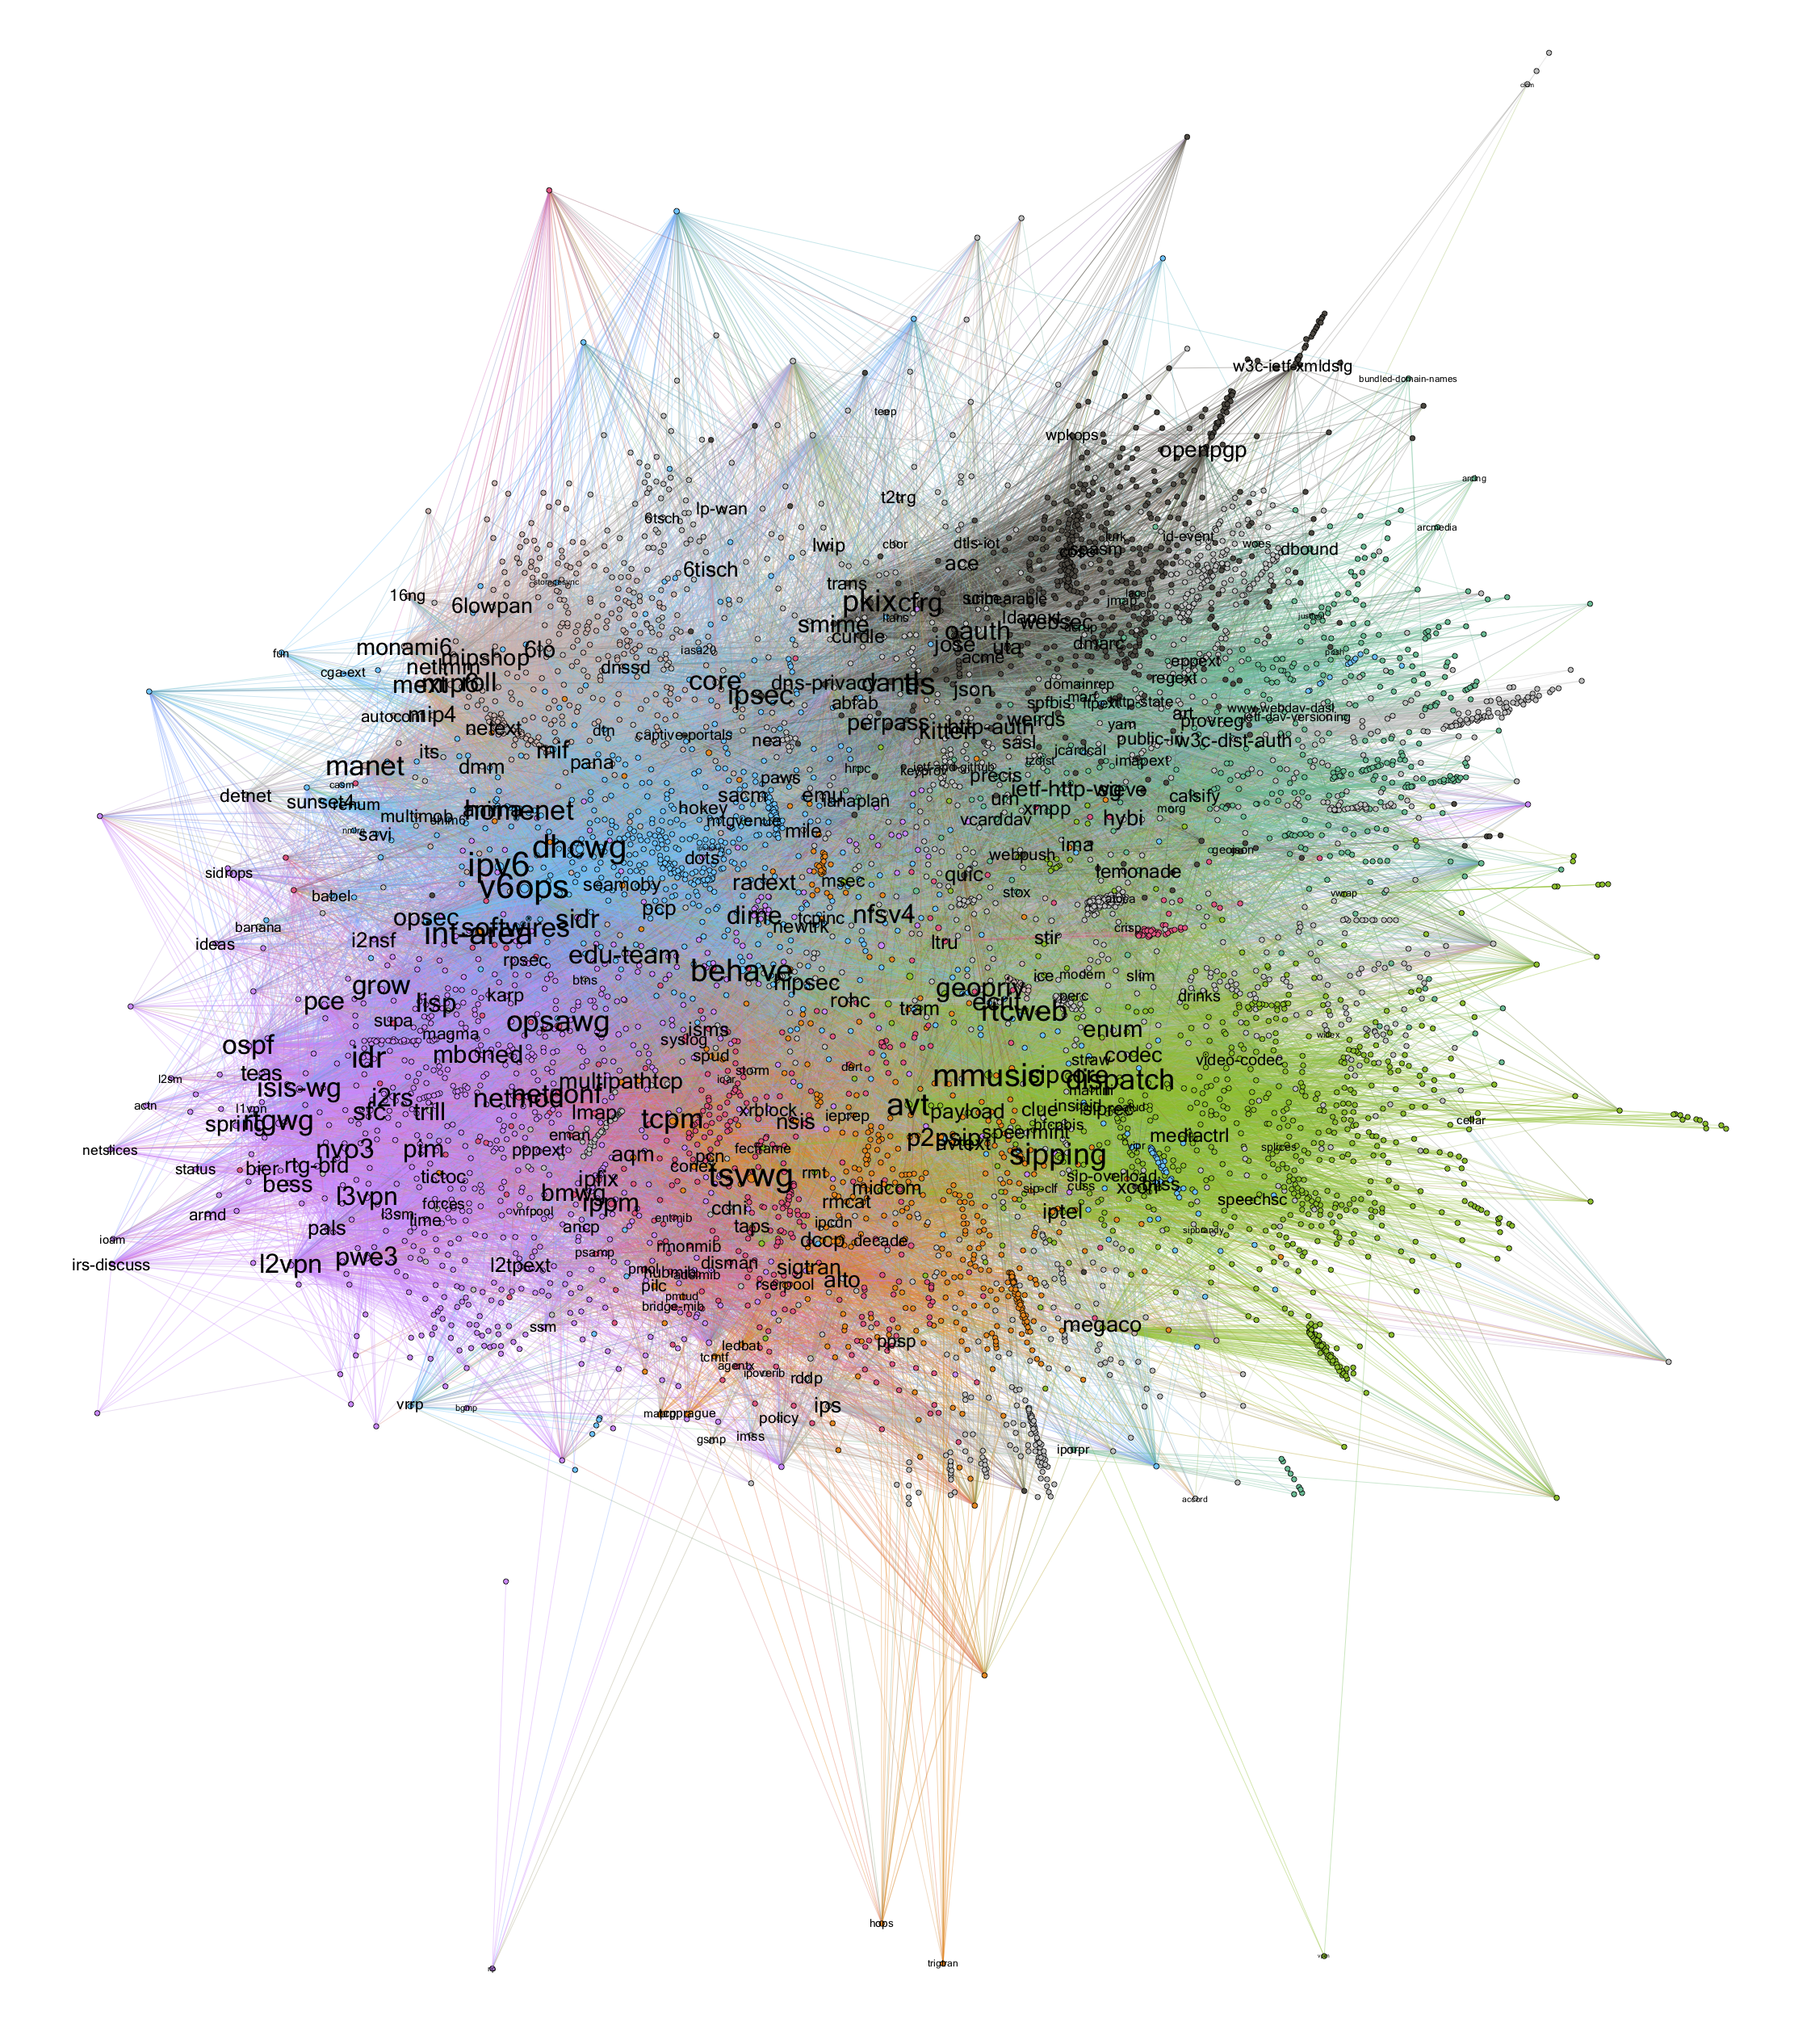 Colorized bipartite graphs of mailing lists for IETF Working Groups and frequent senders.